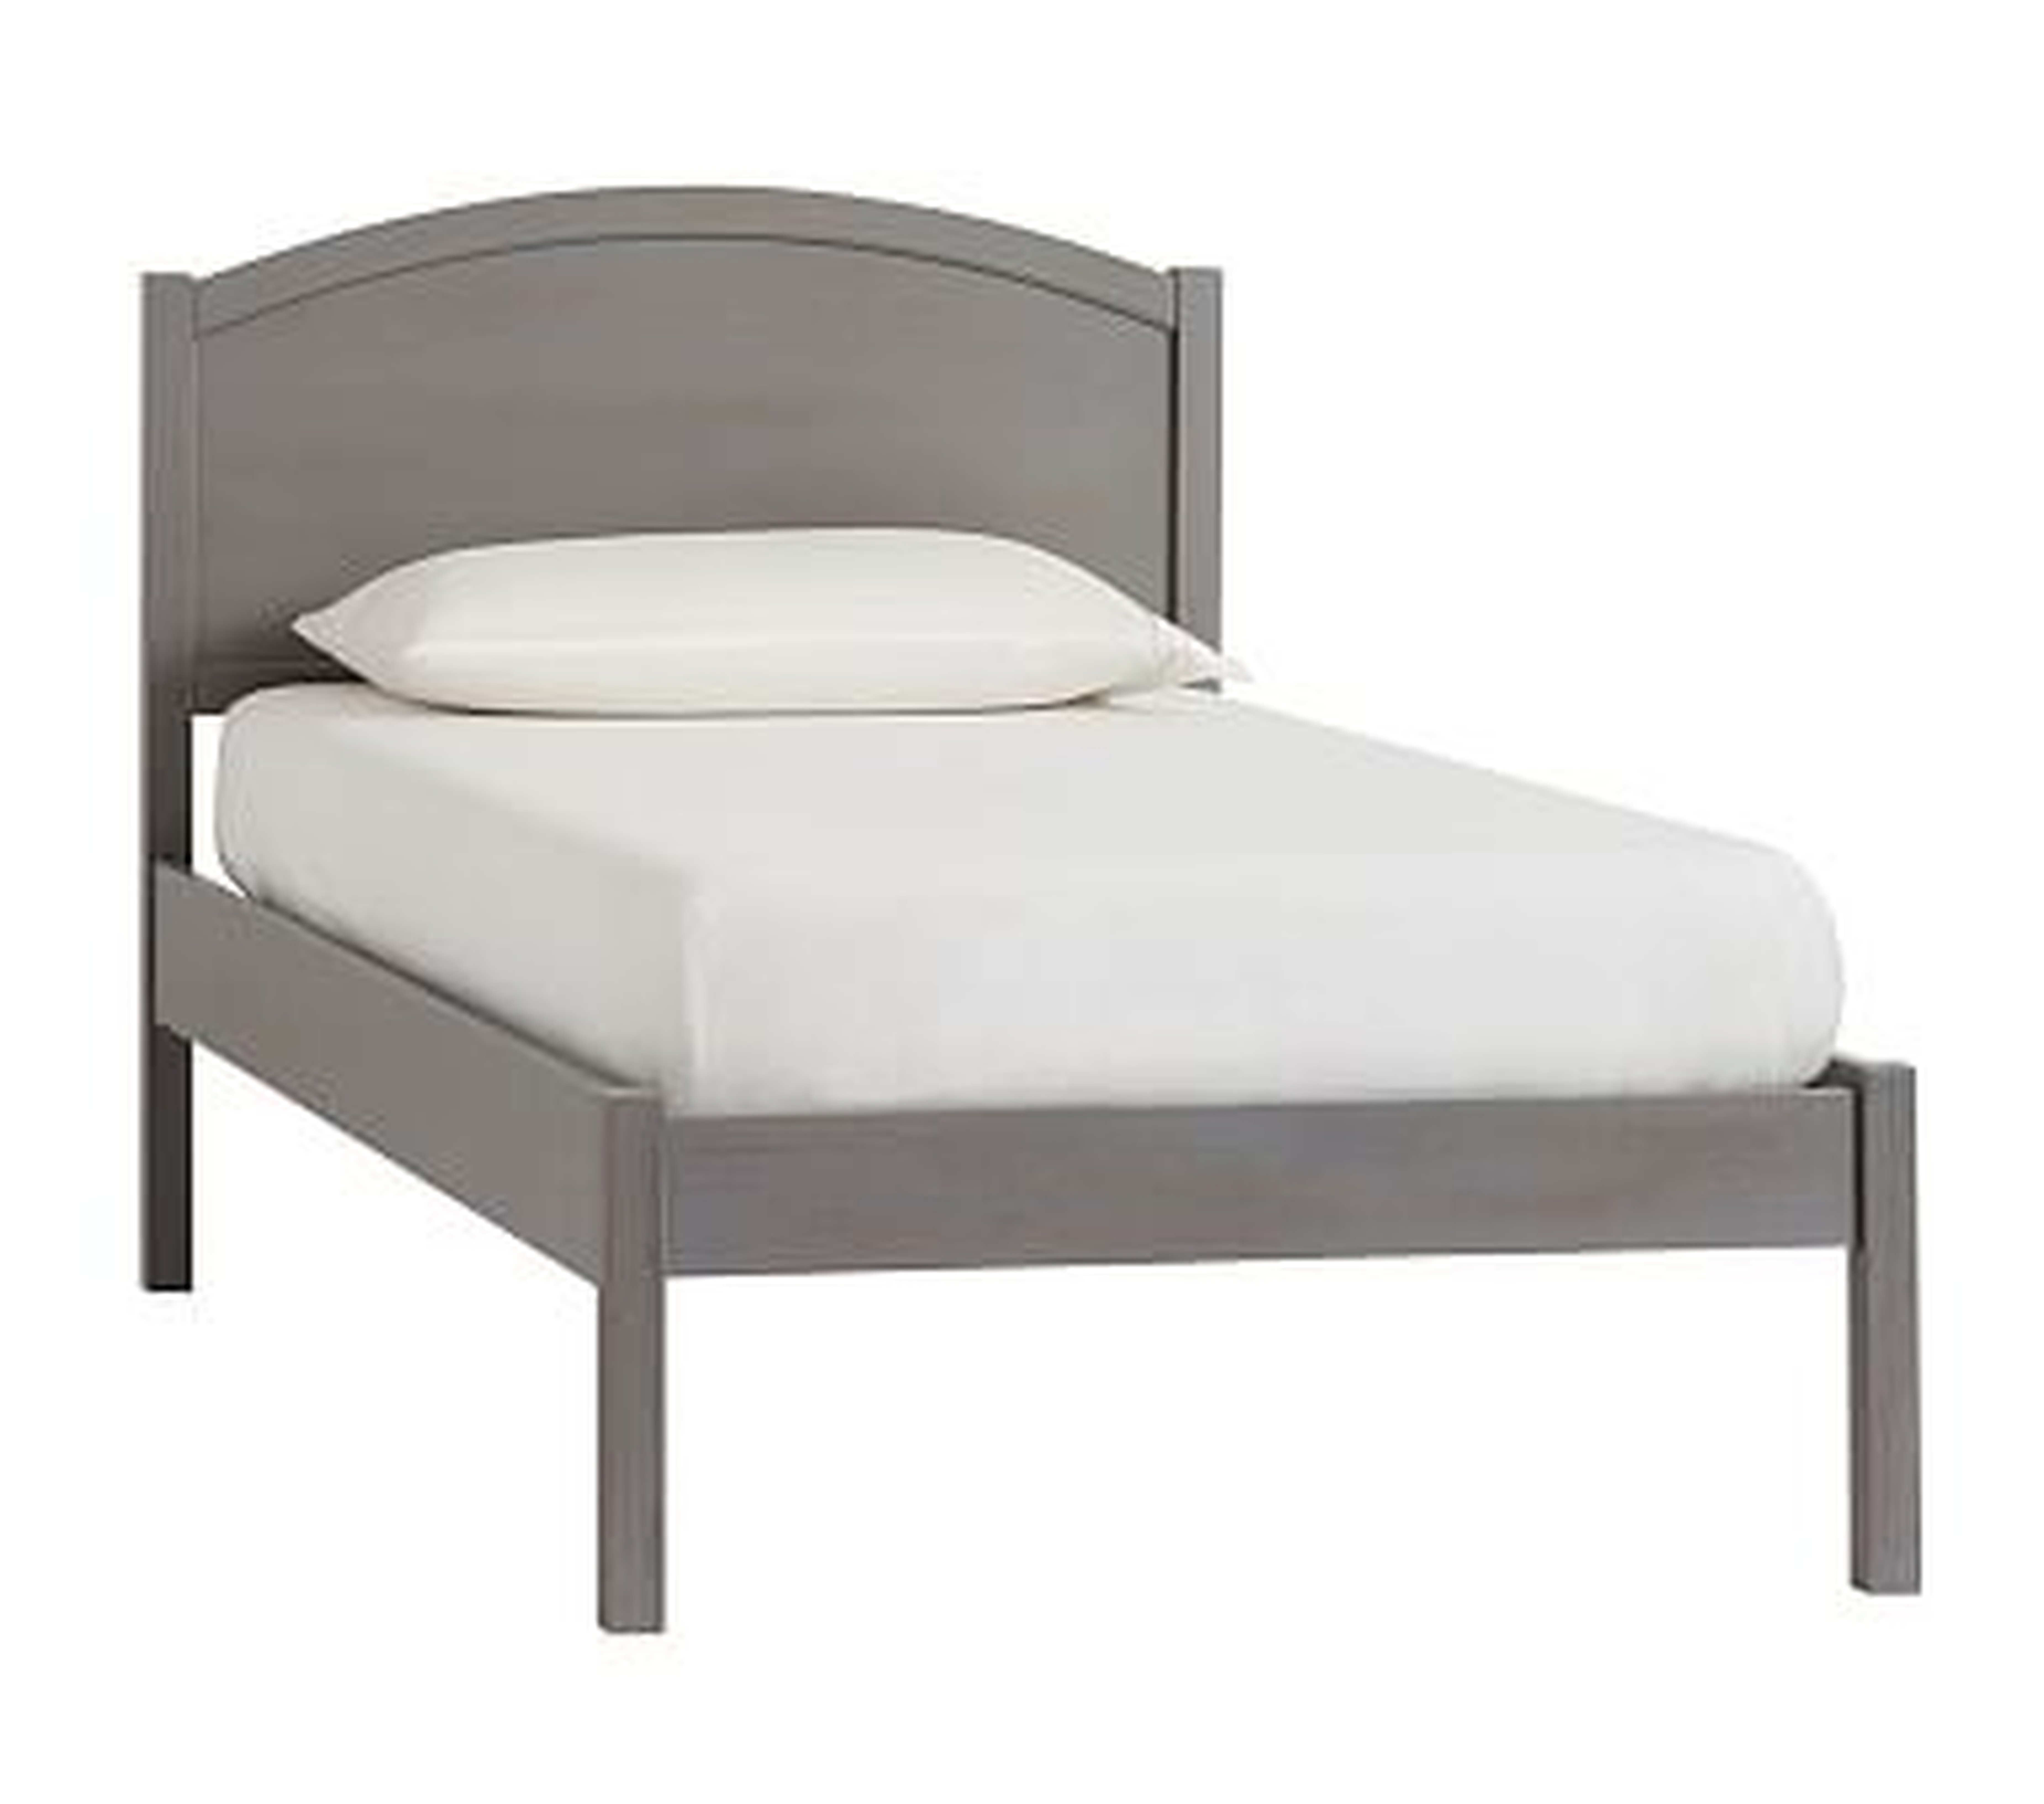 Austen Bed, Twin, Antiqued Charcoal, UPS - Pottery Barn Kids